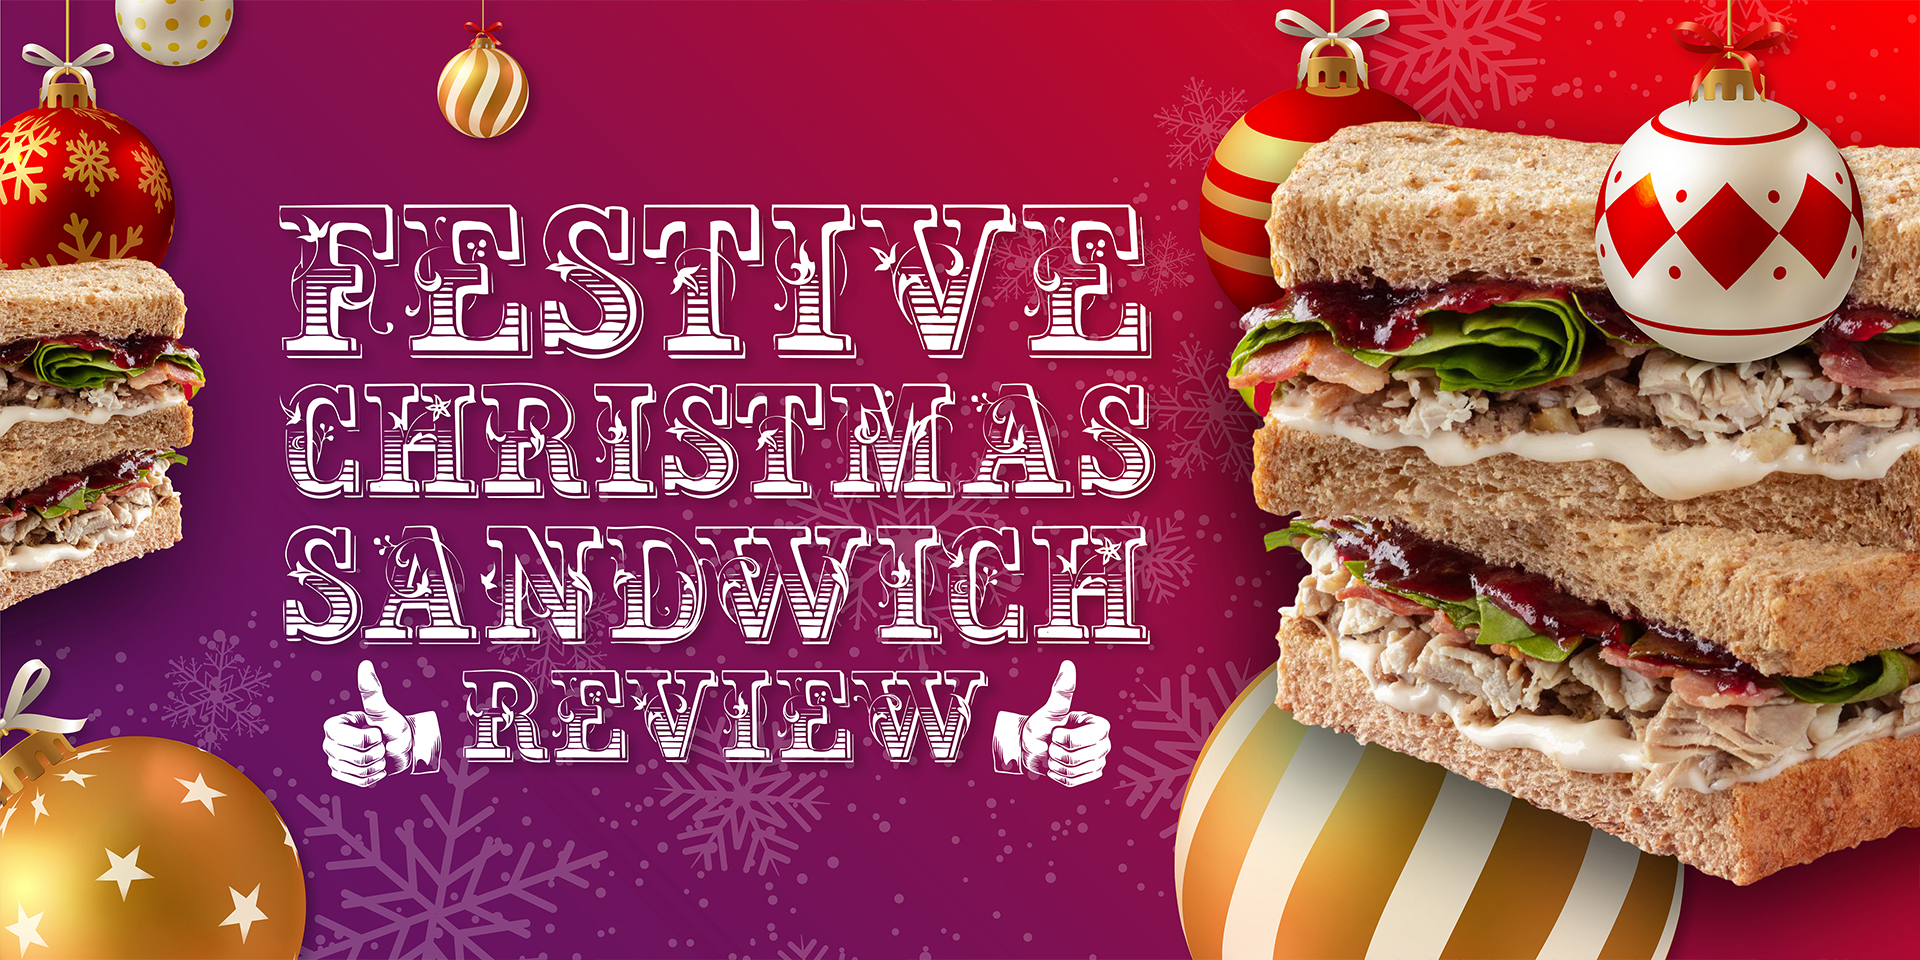 Christmas Sandwich Review Sainsbury’s vs Boots RMS